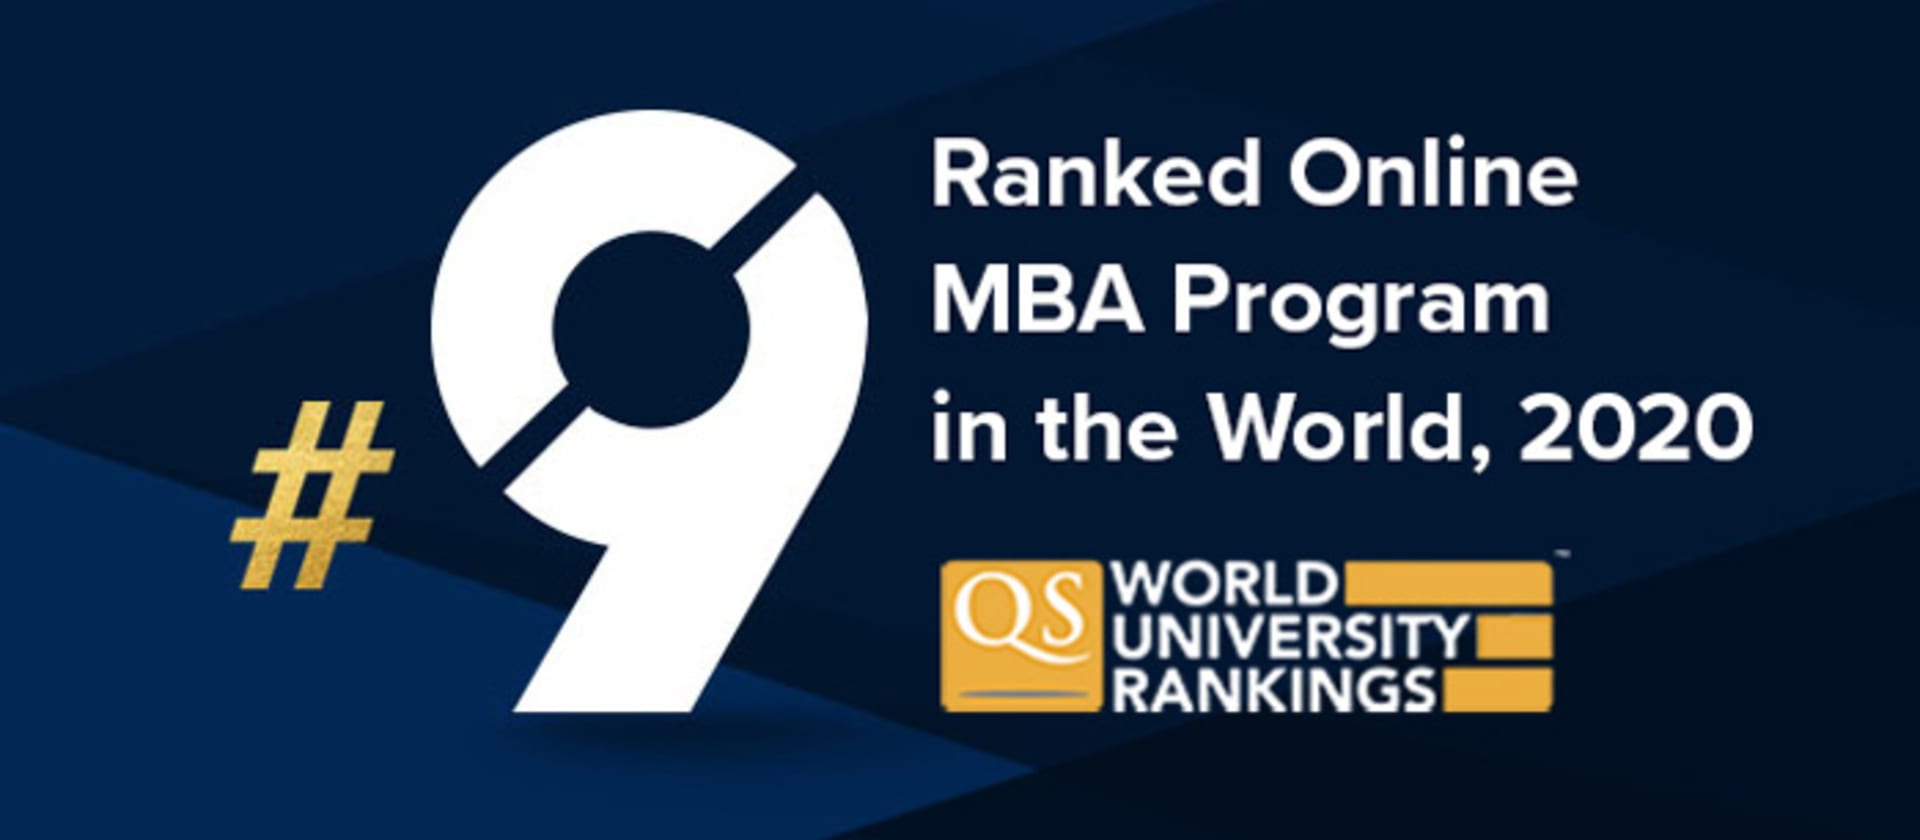 FIU Business Online MBA program ranked No. 9 in the world FIU News